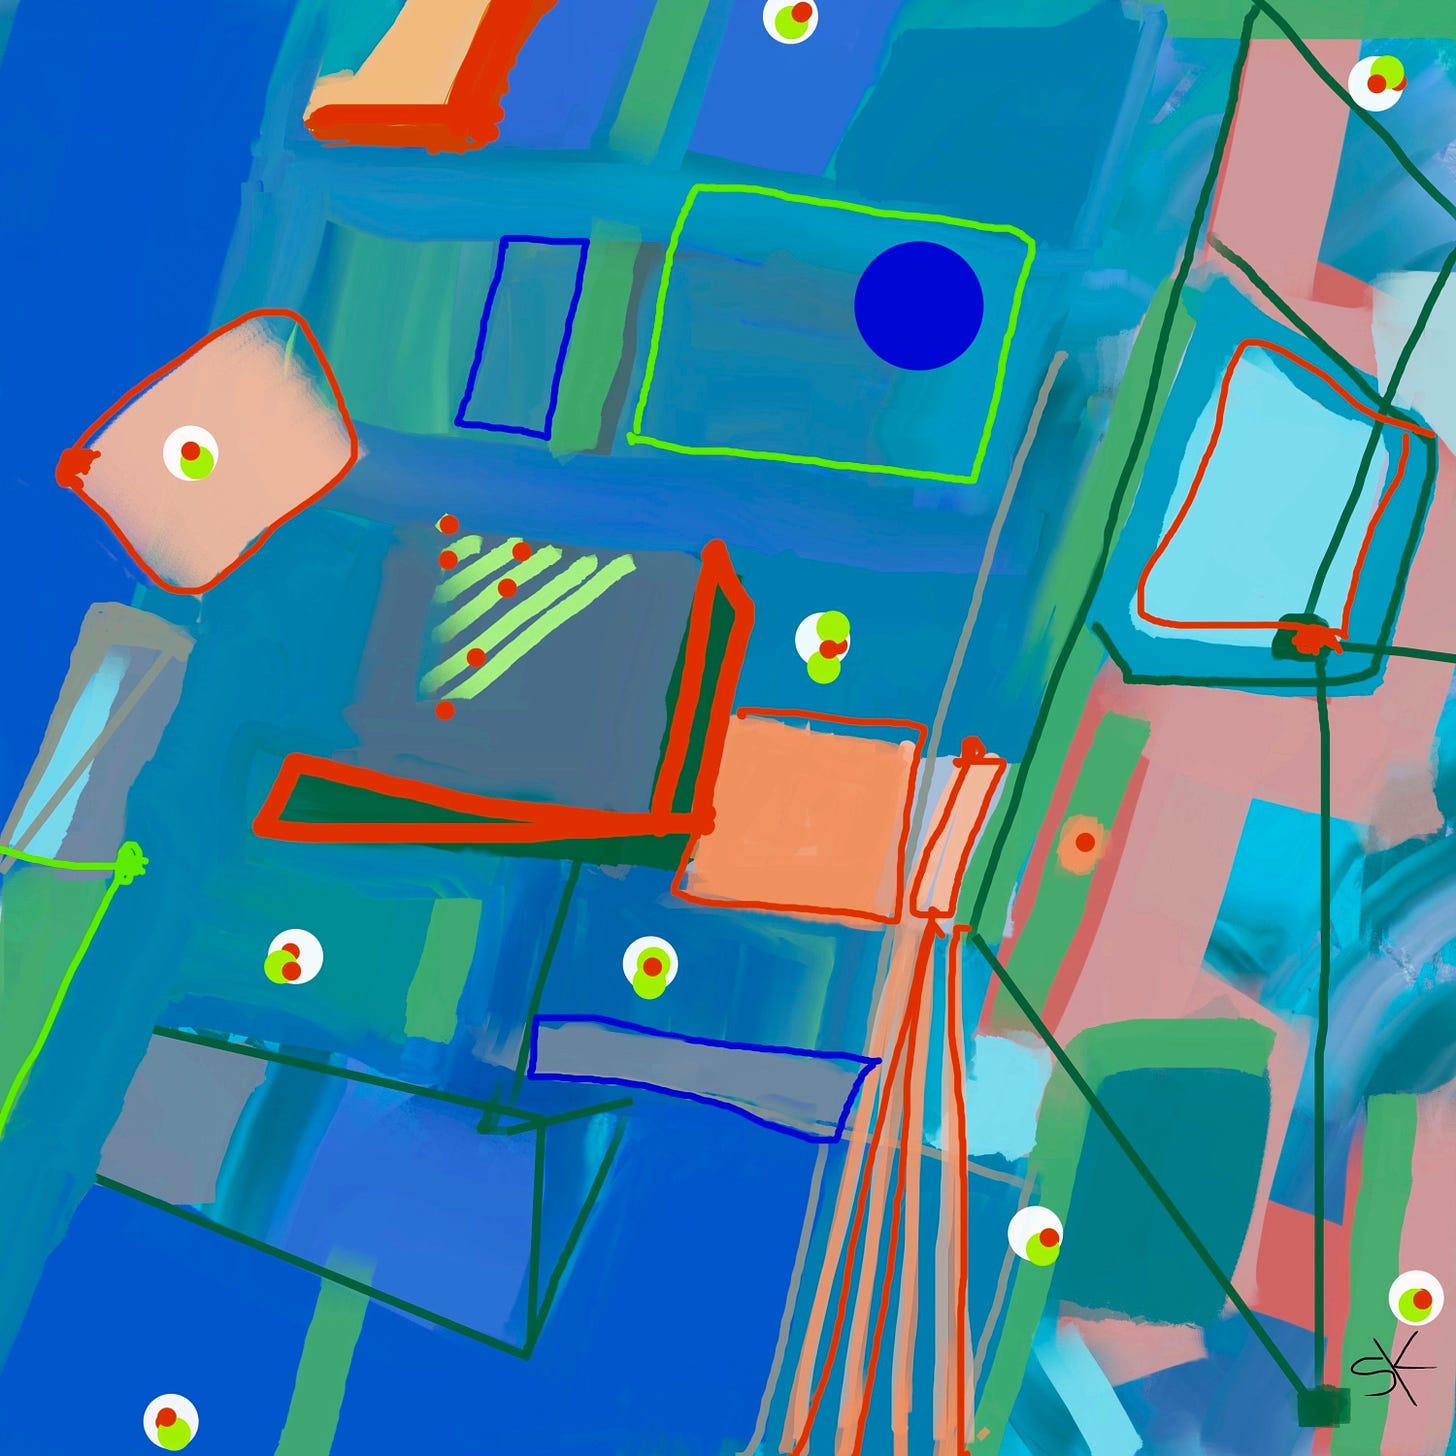 Abstract painting by Sherry Killam Arts with blue, orange, and green geometric shapes arranged disorderly.